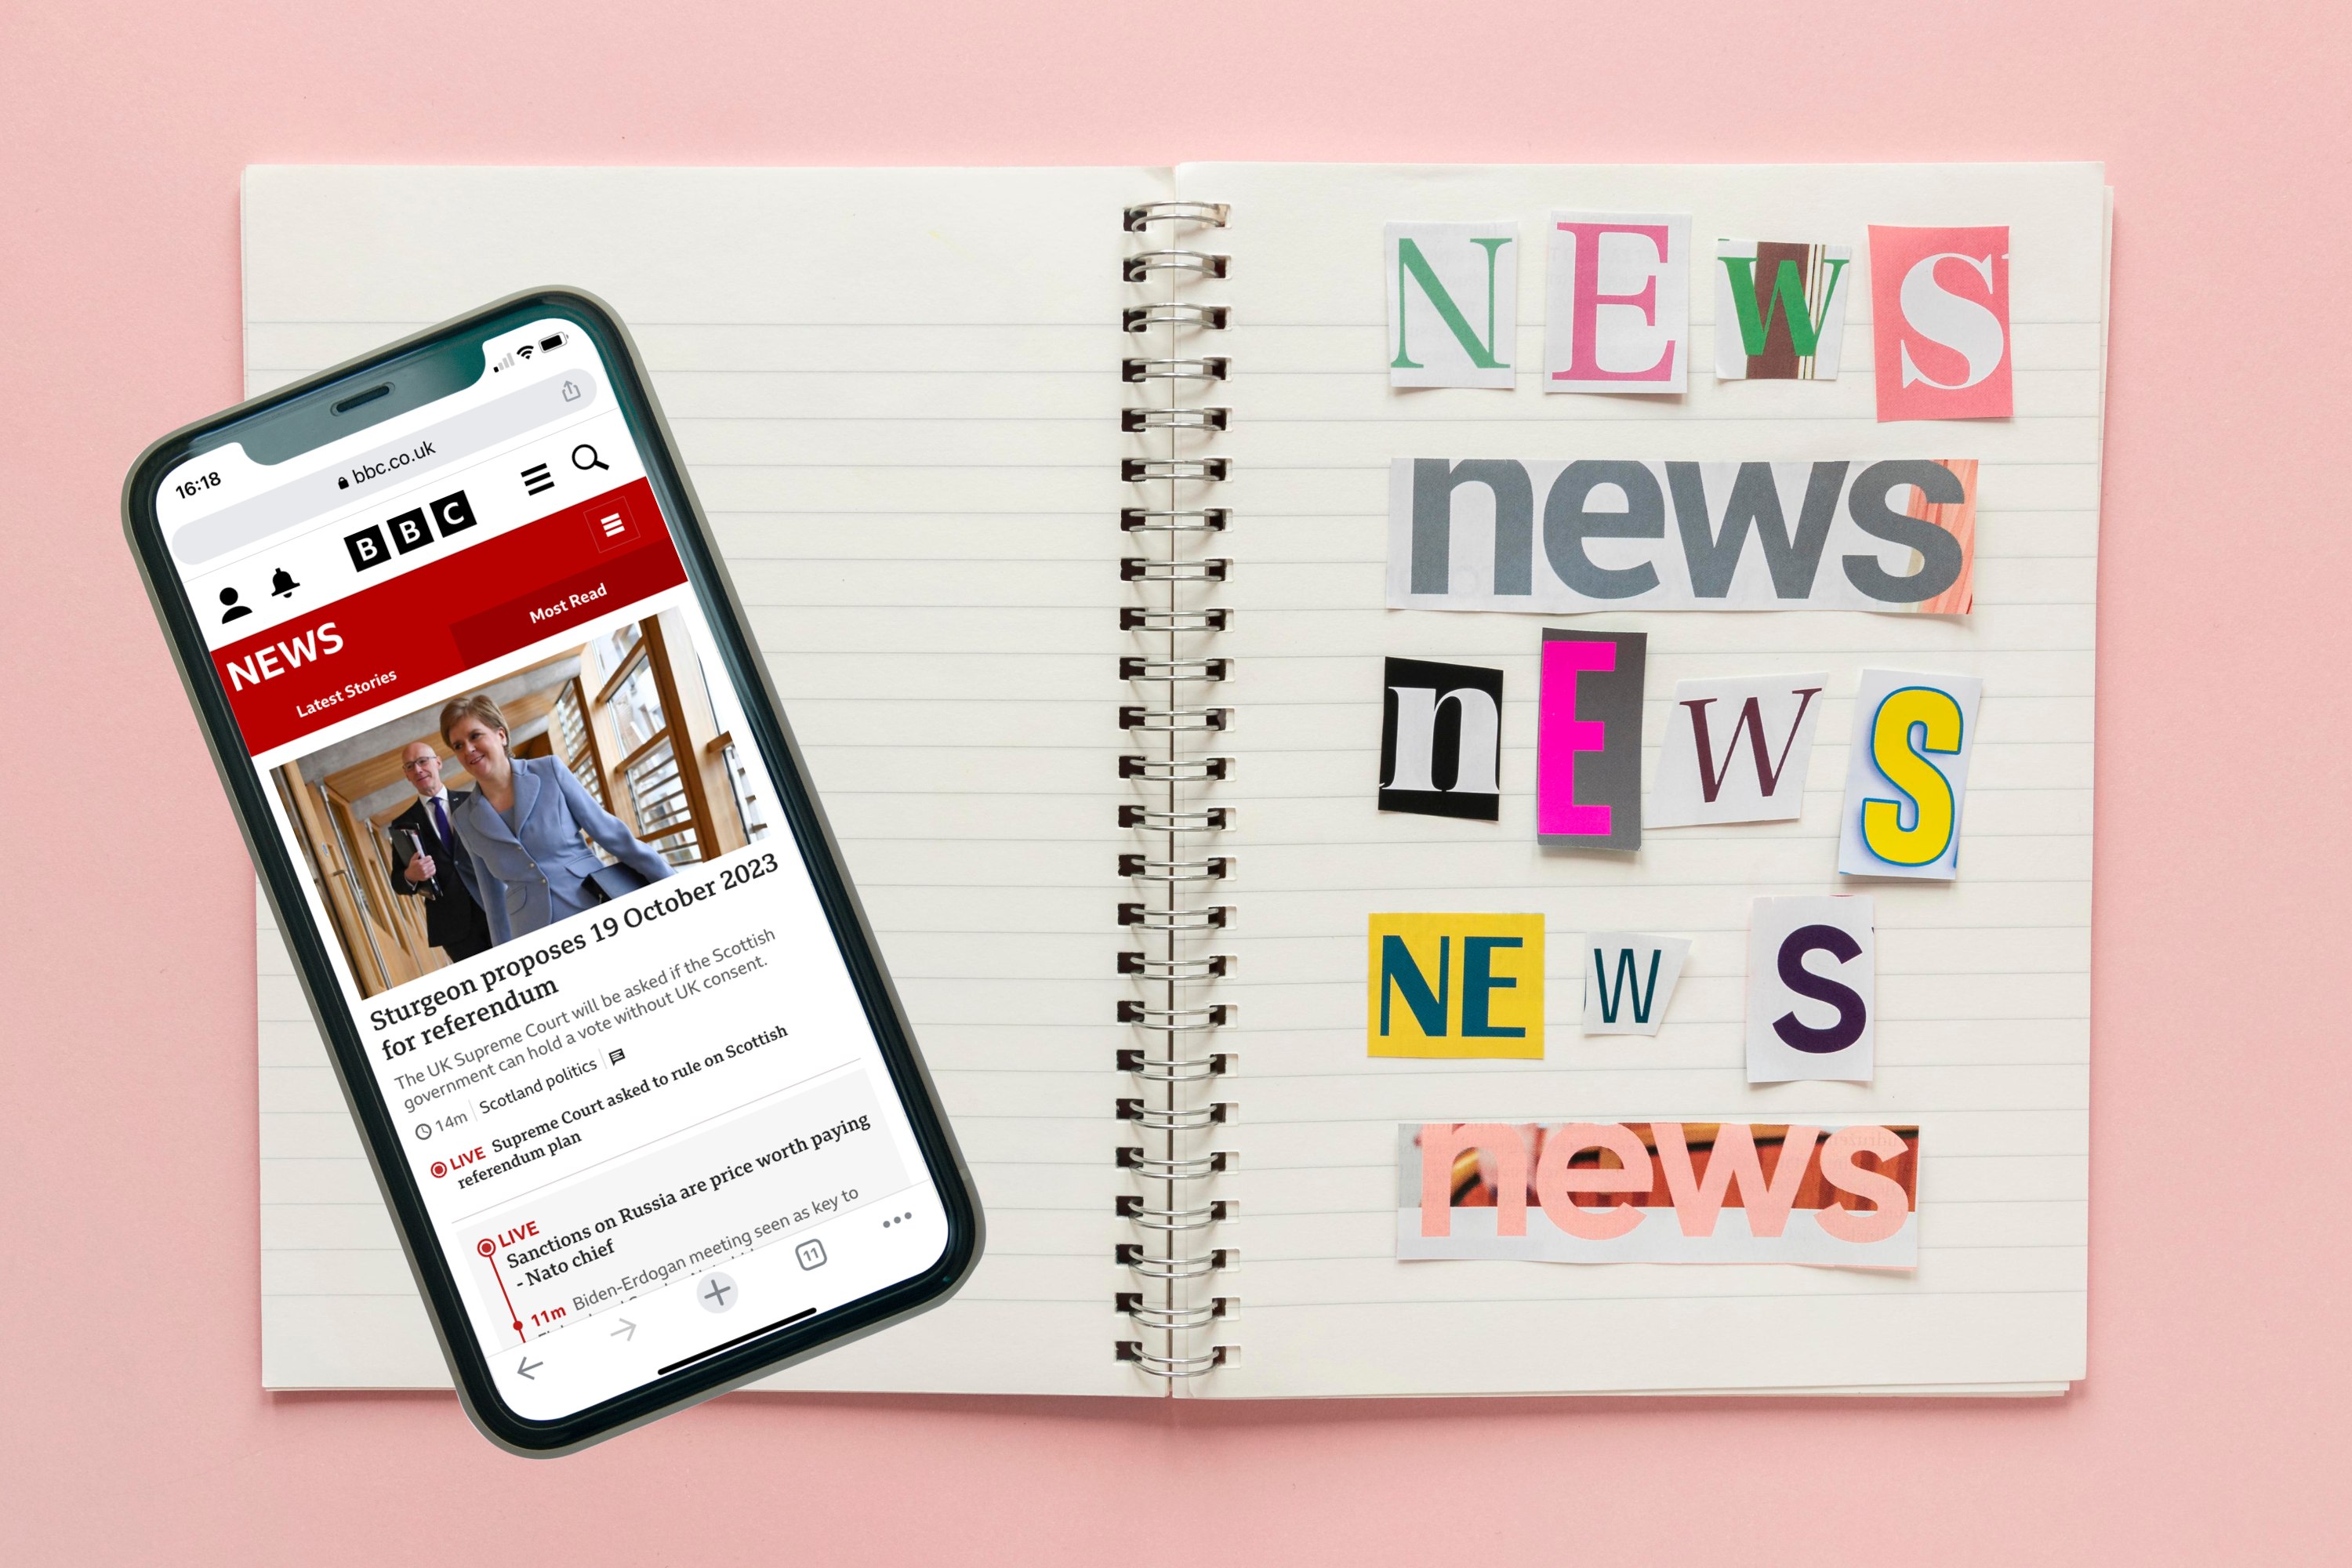 Notebook with cut and paste letters spelling 'News' with a smartphone resting on top showing the BBC News page.